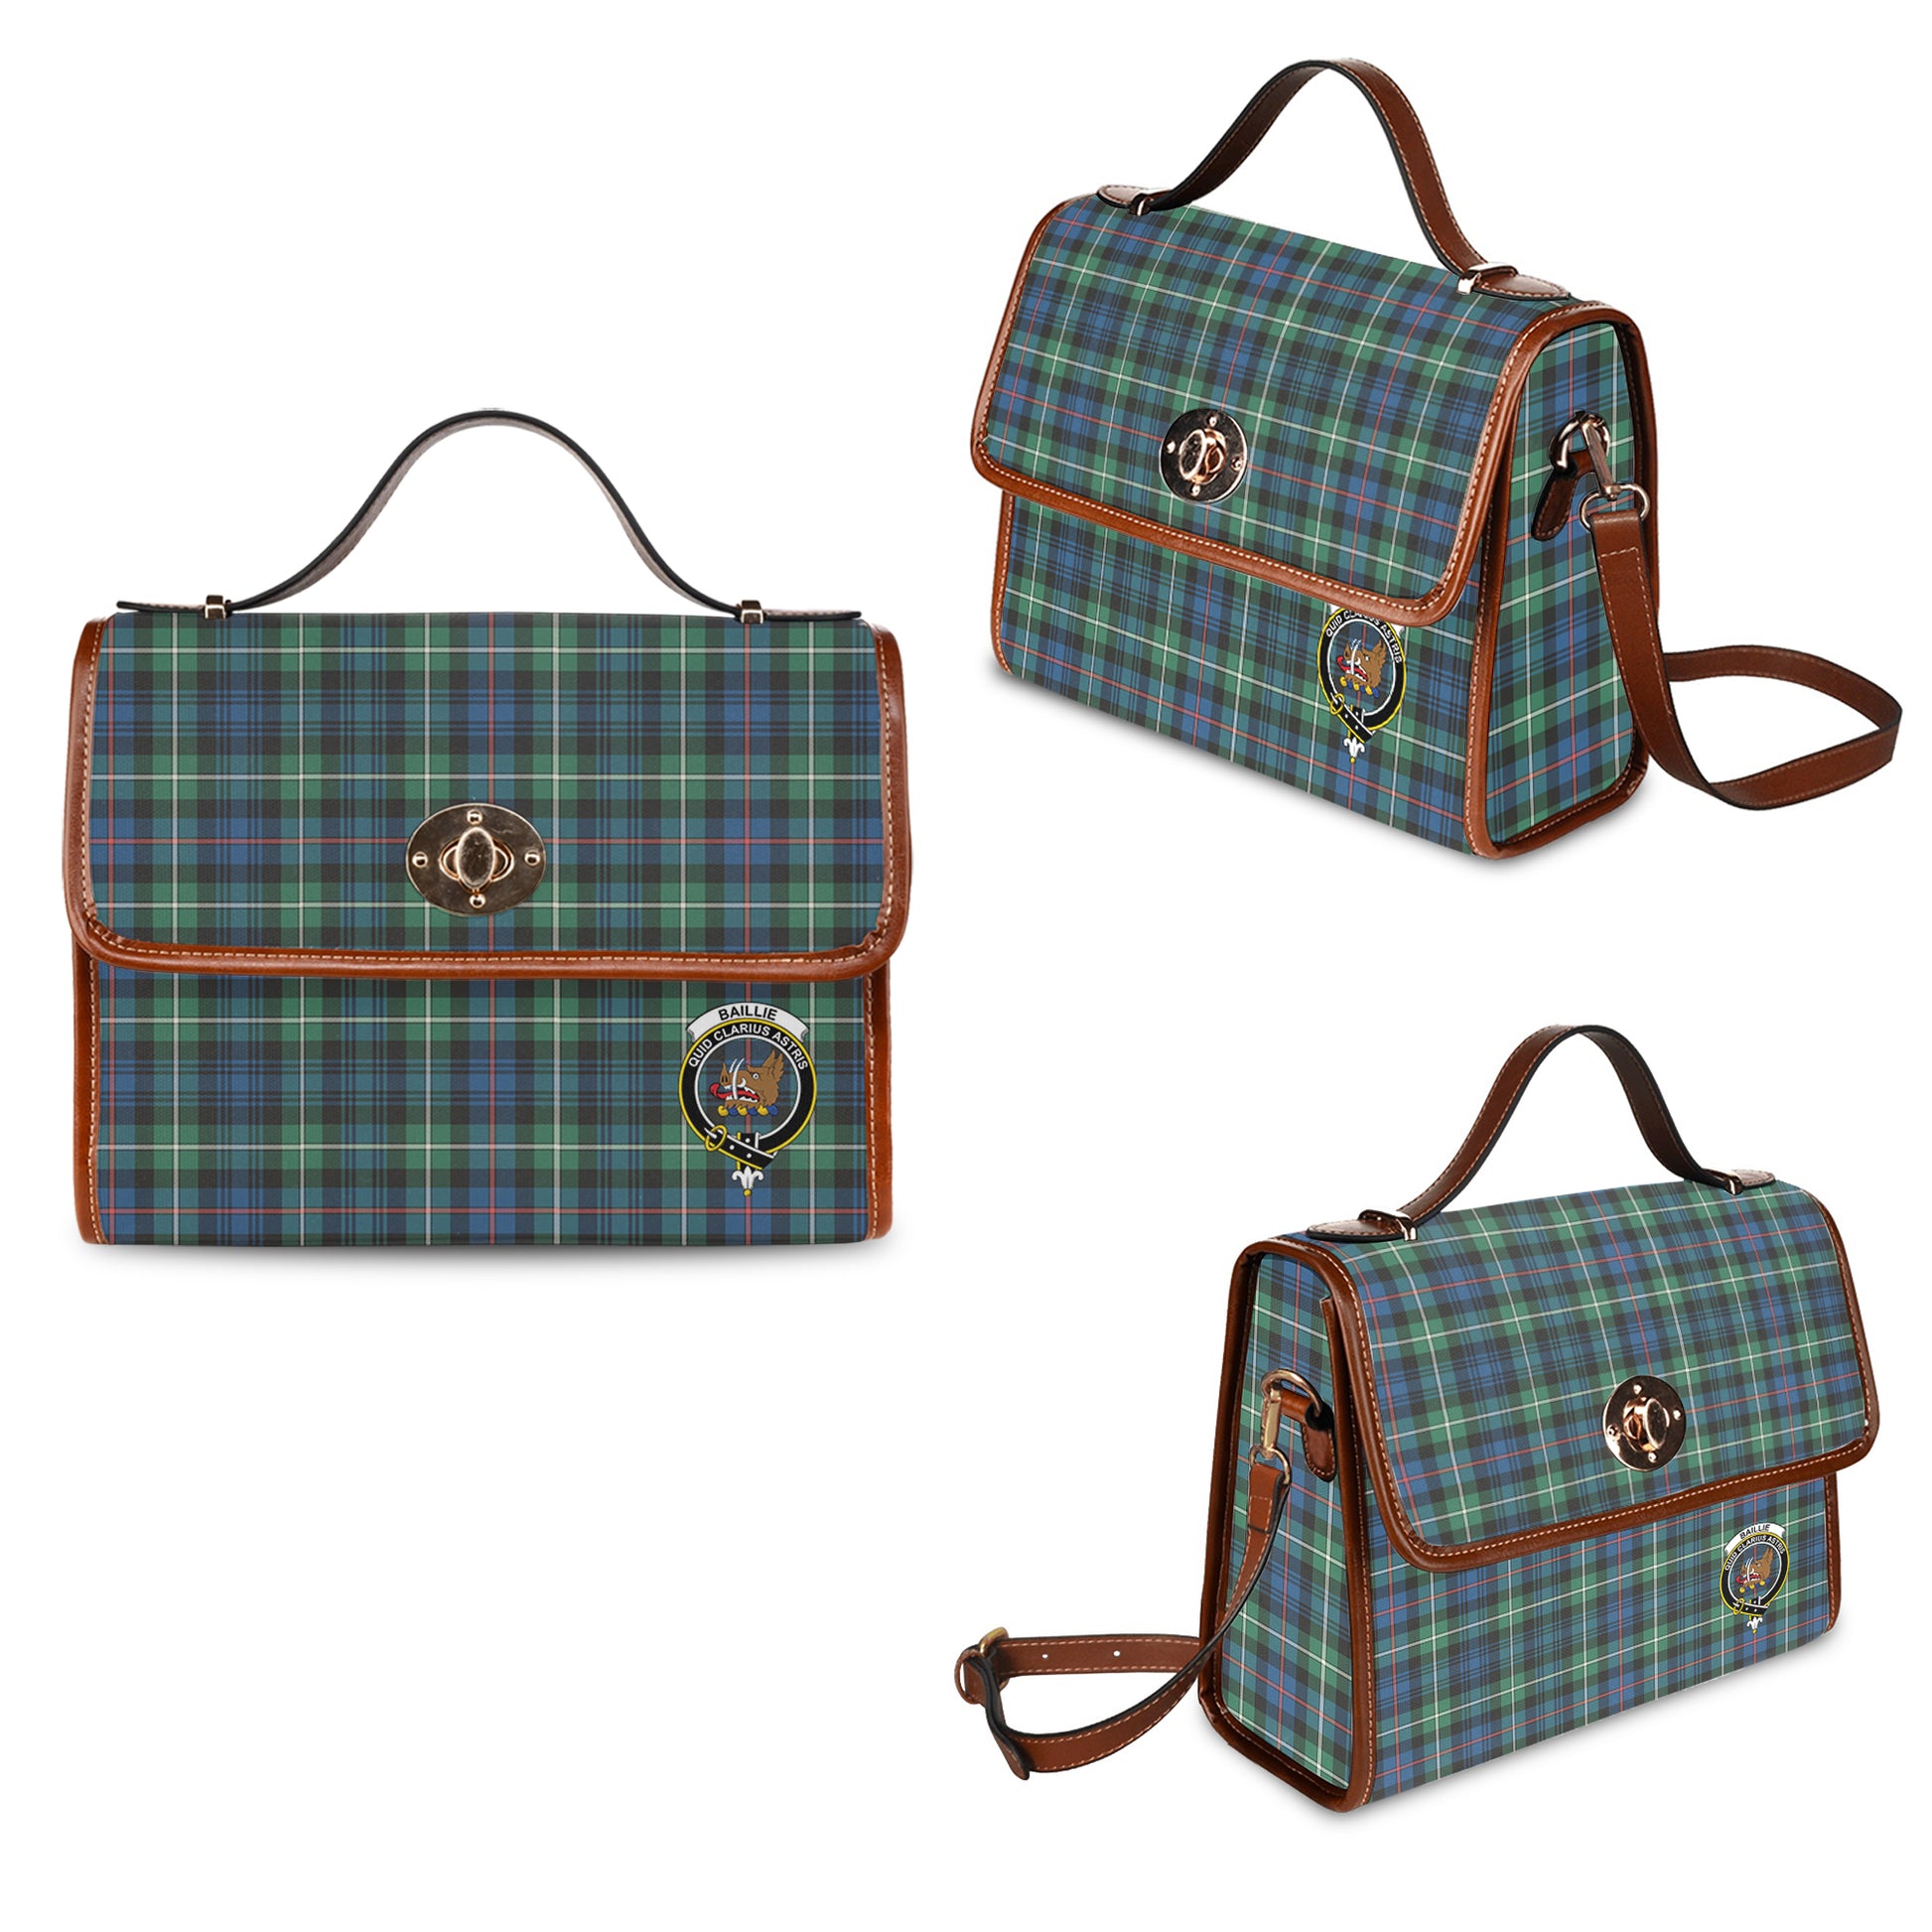 Baillie Ancient Tartan Leather Strap Waterproof Canvas Bag with Family Crest One Size 34cm * 42cm (13.4" x 16.5") - Tartanvibesclothing